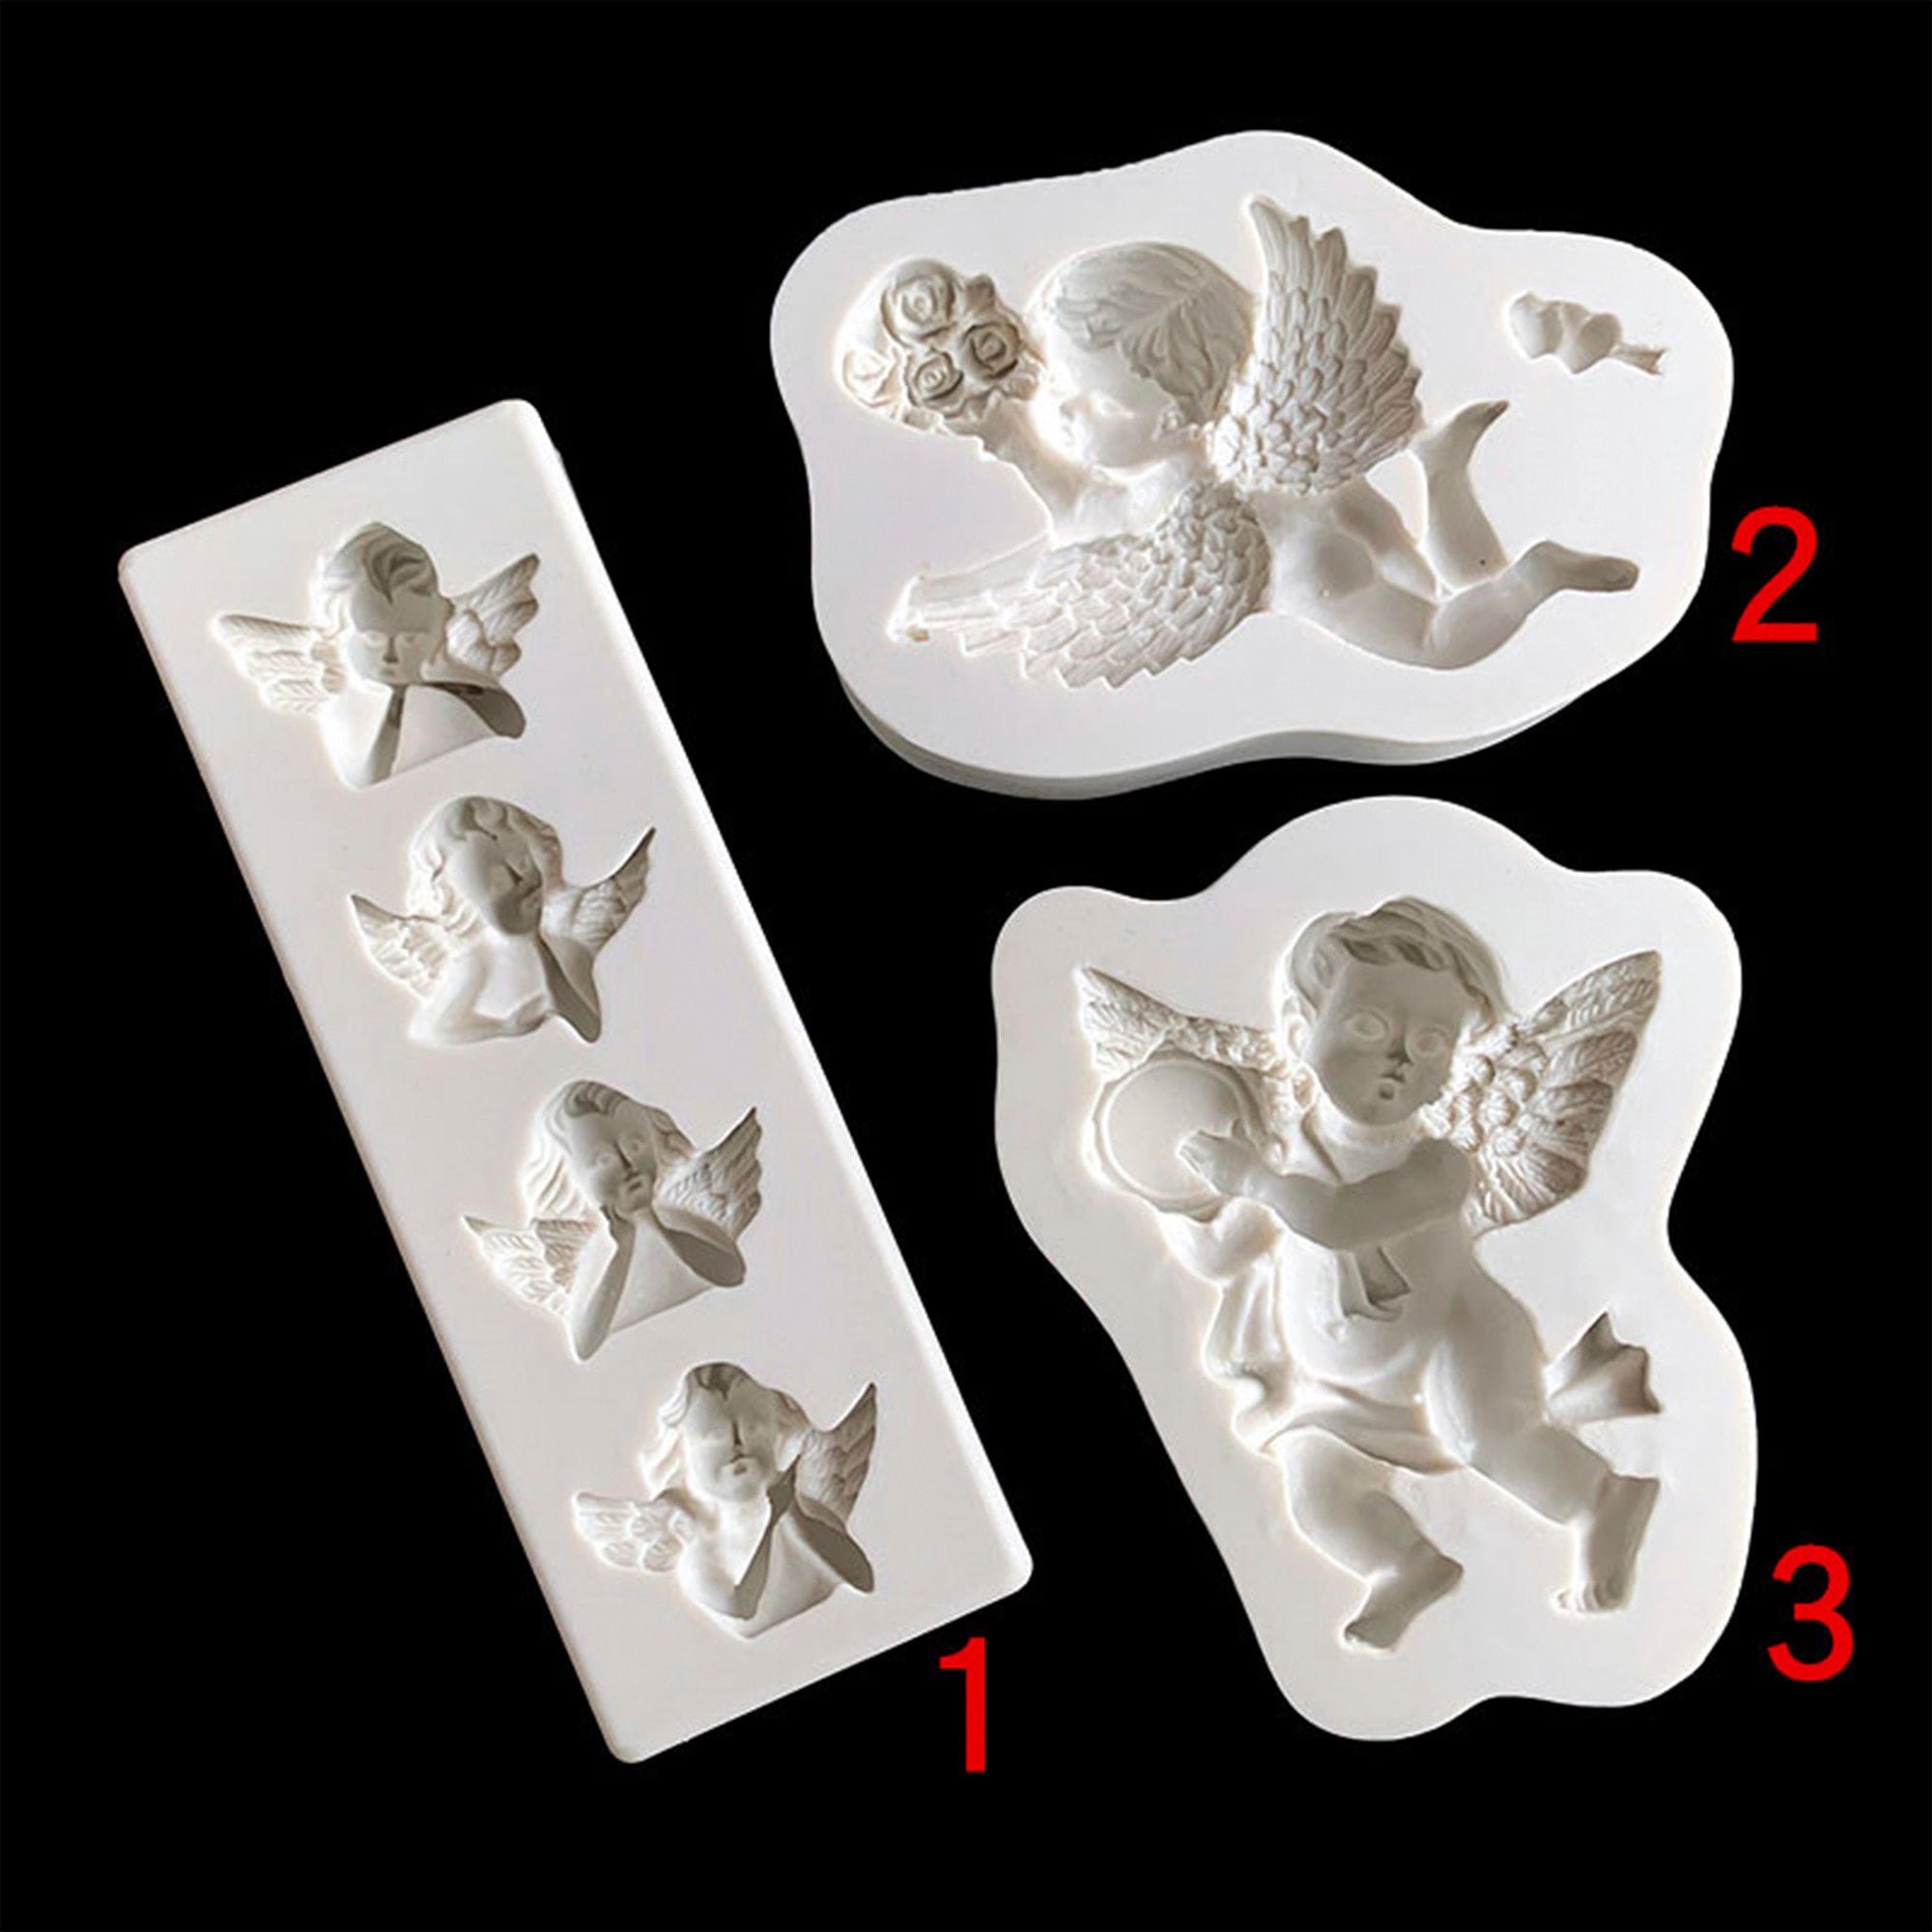 Angel and flowers silicone mold for hand made soap and crafts L145 -  Silicone Molds Wholesale & Retail - Fondant, Soap, Candy, DIY Cake Molds